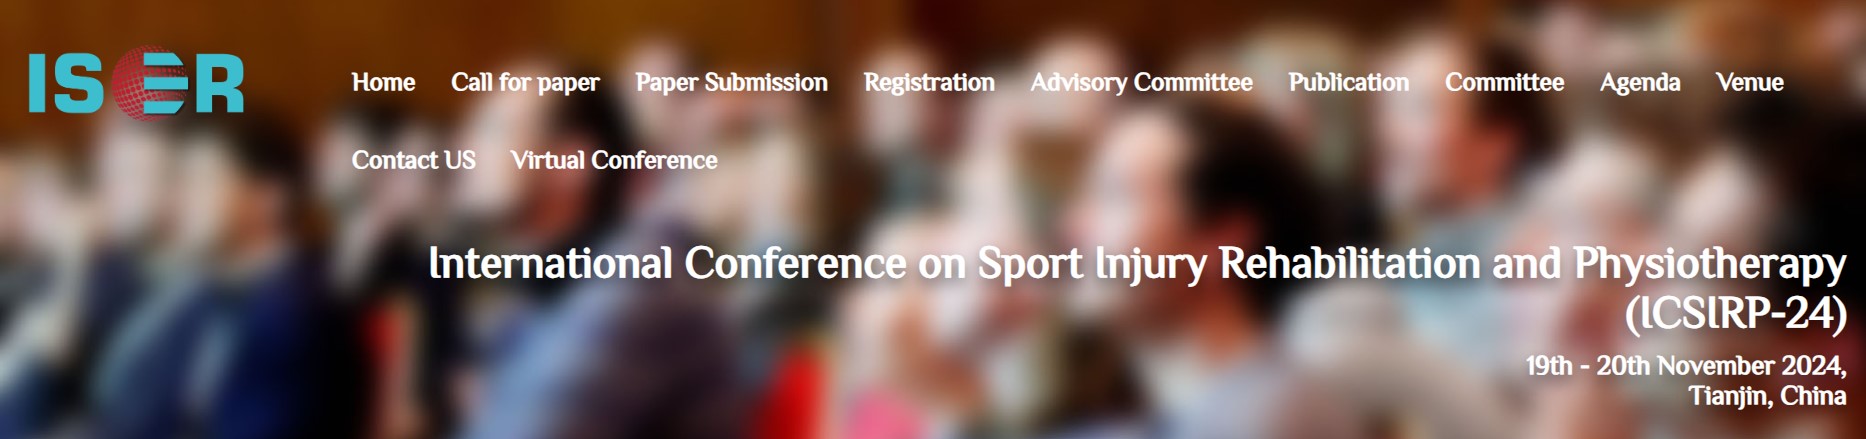 International Conference on Sport Injury Rehabilitation and Physiotherapy